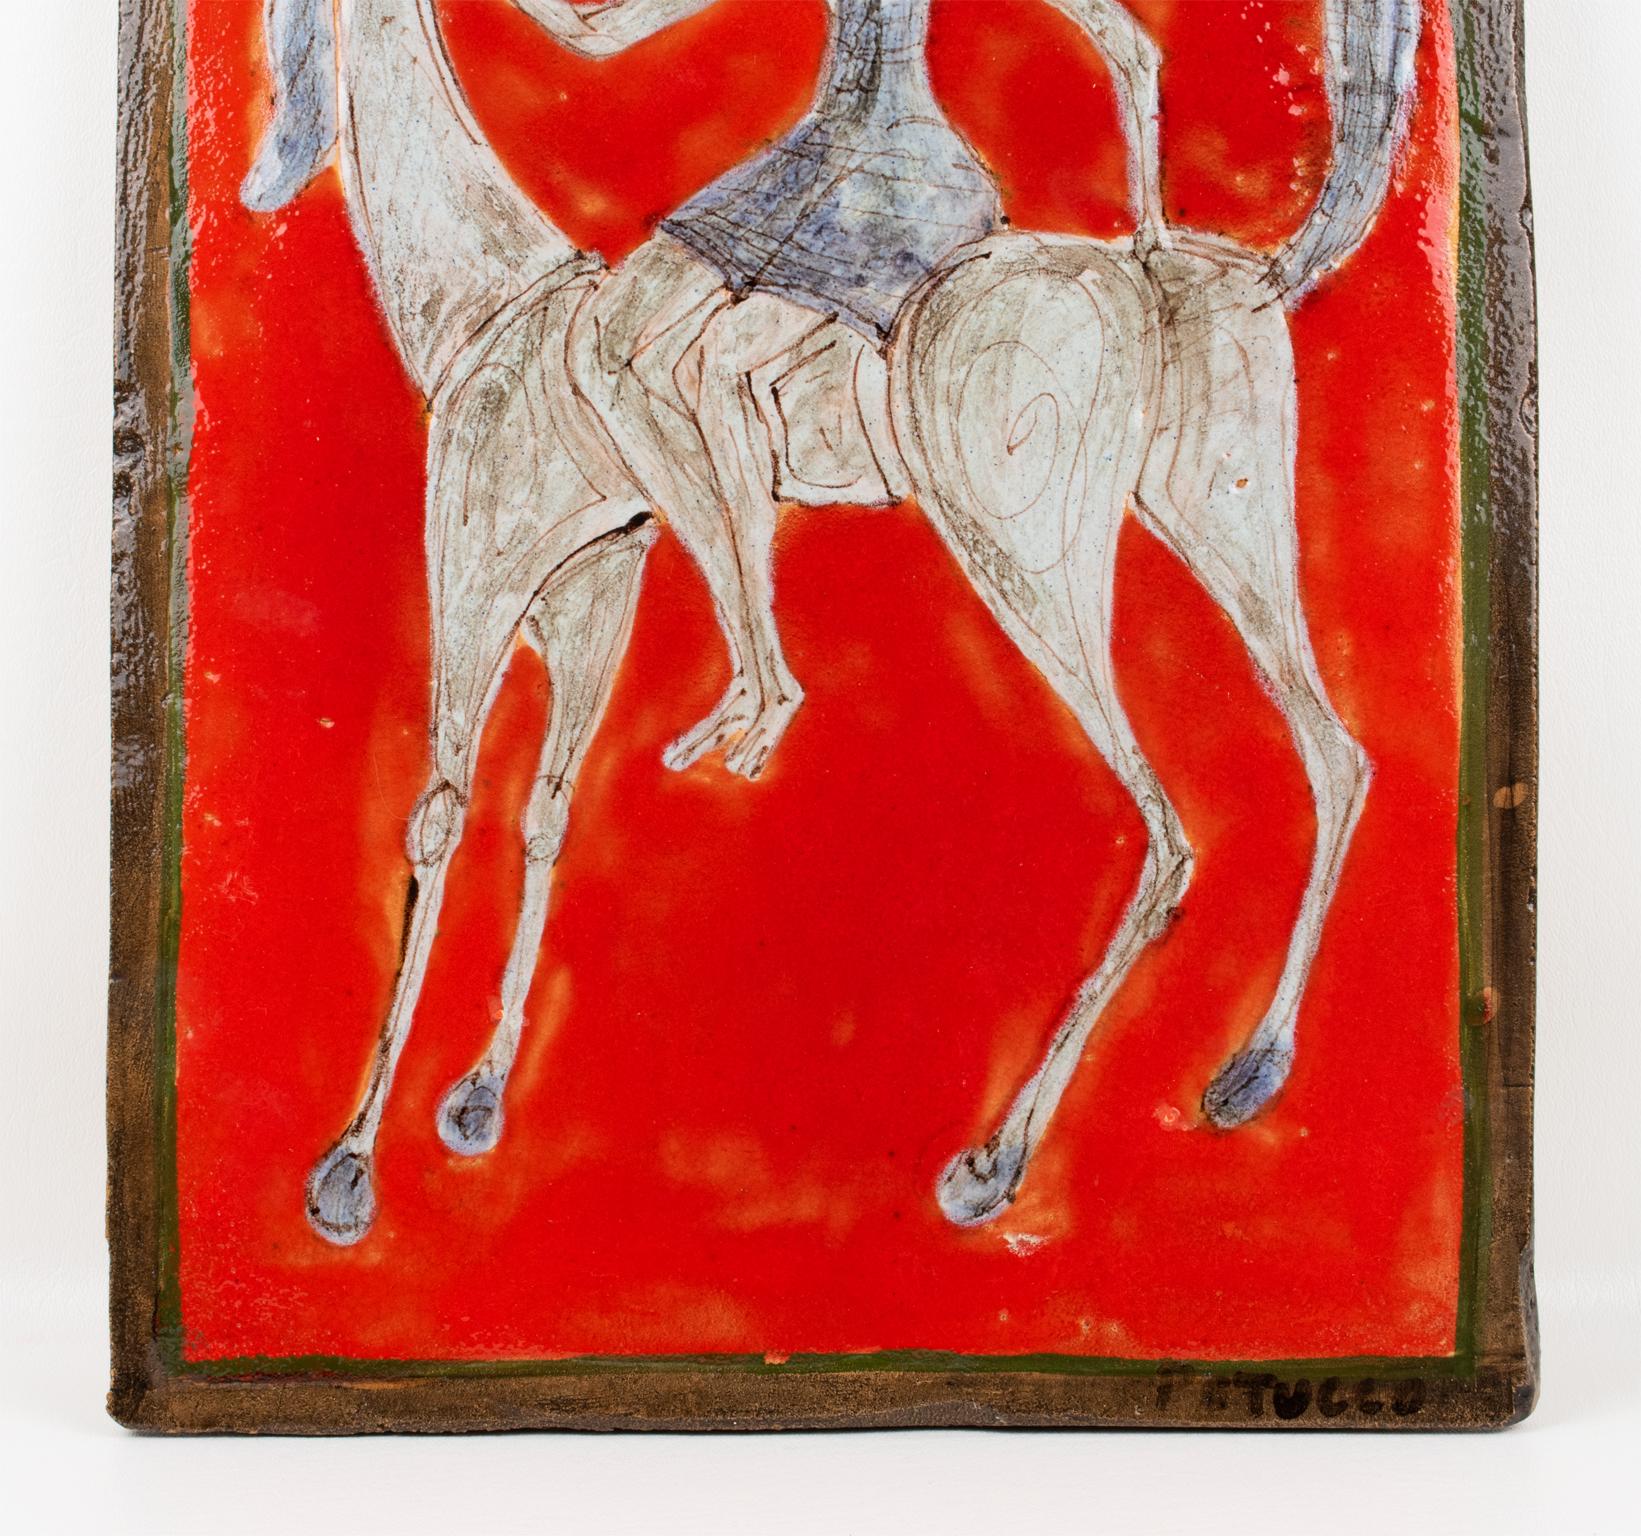 Giovanni Petucco Italy Ceramic Wall Tile of Woman on a Horse, 1950s For Sale 2